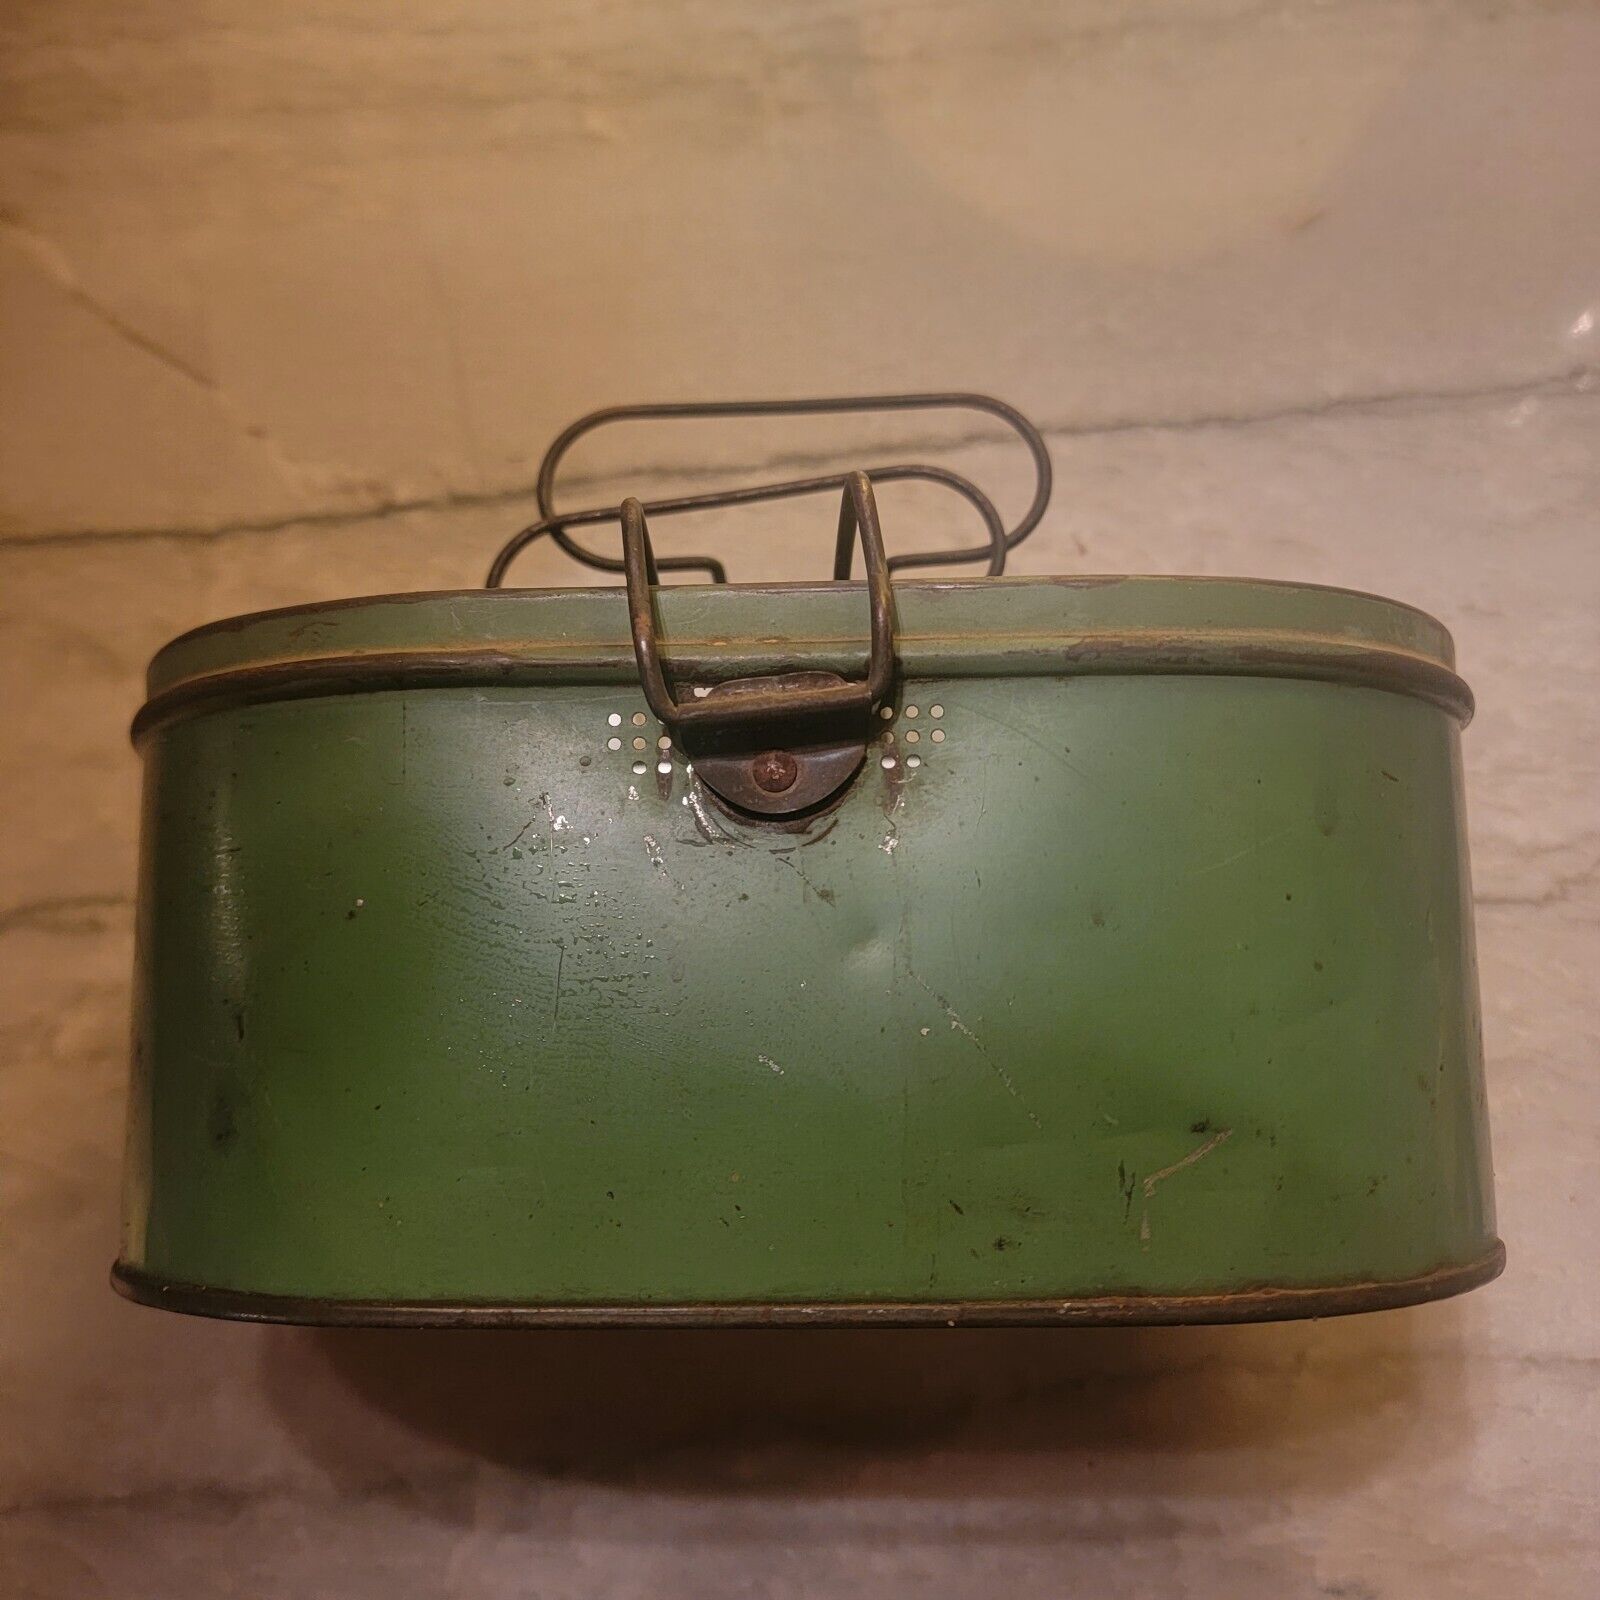 Vintage Handy Oval Lunch Box, Patent No. 1737249 1930\'s Lunch Box, Green Color